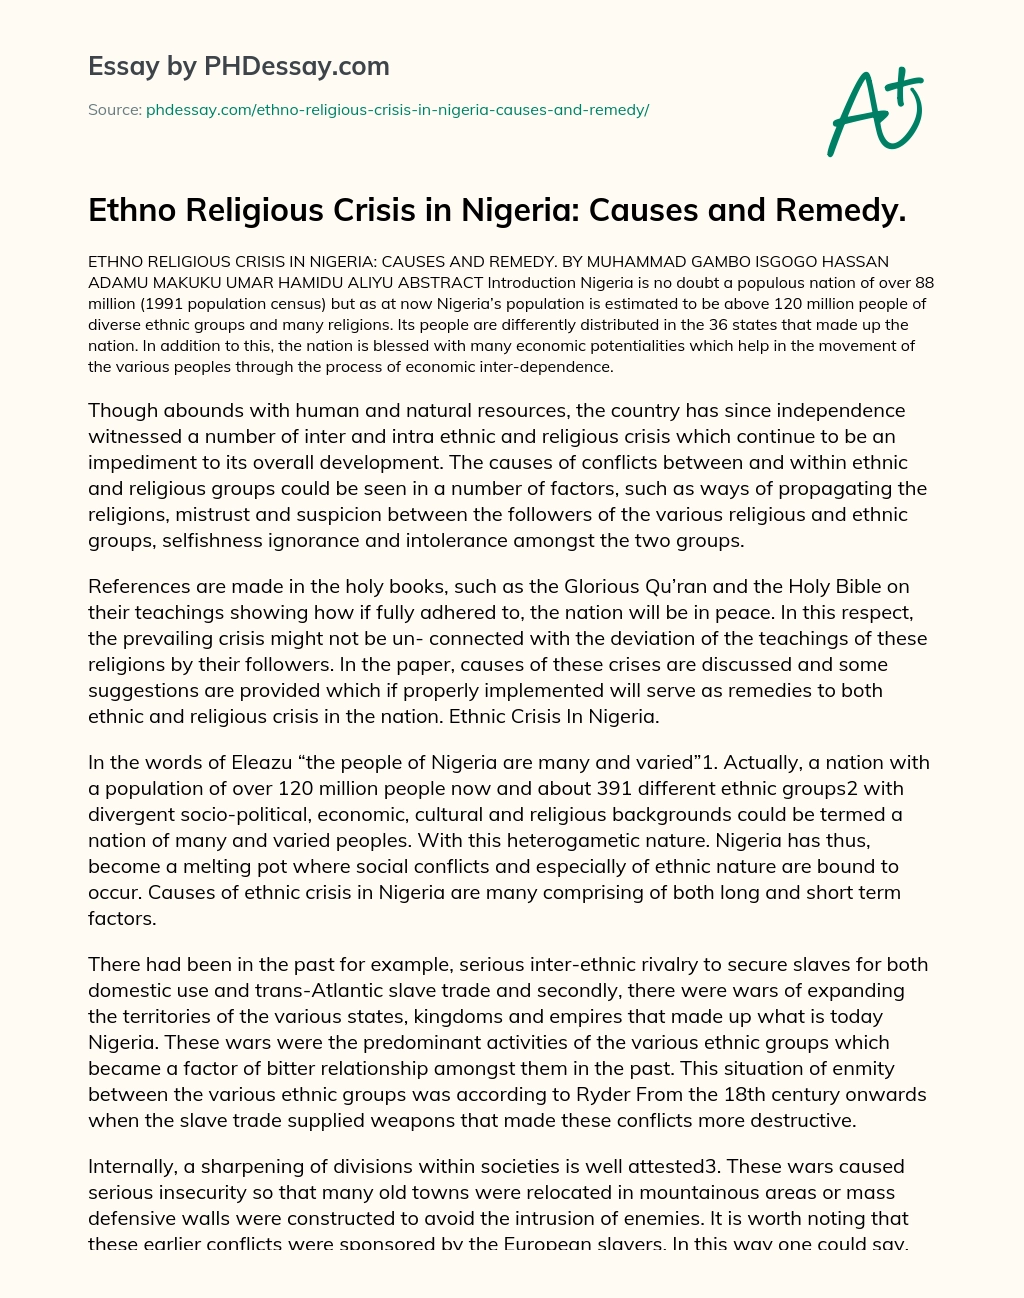 Ethno Religious Crisis in Nigeria: Causes and Remedy. essay